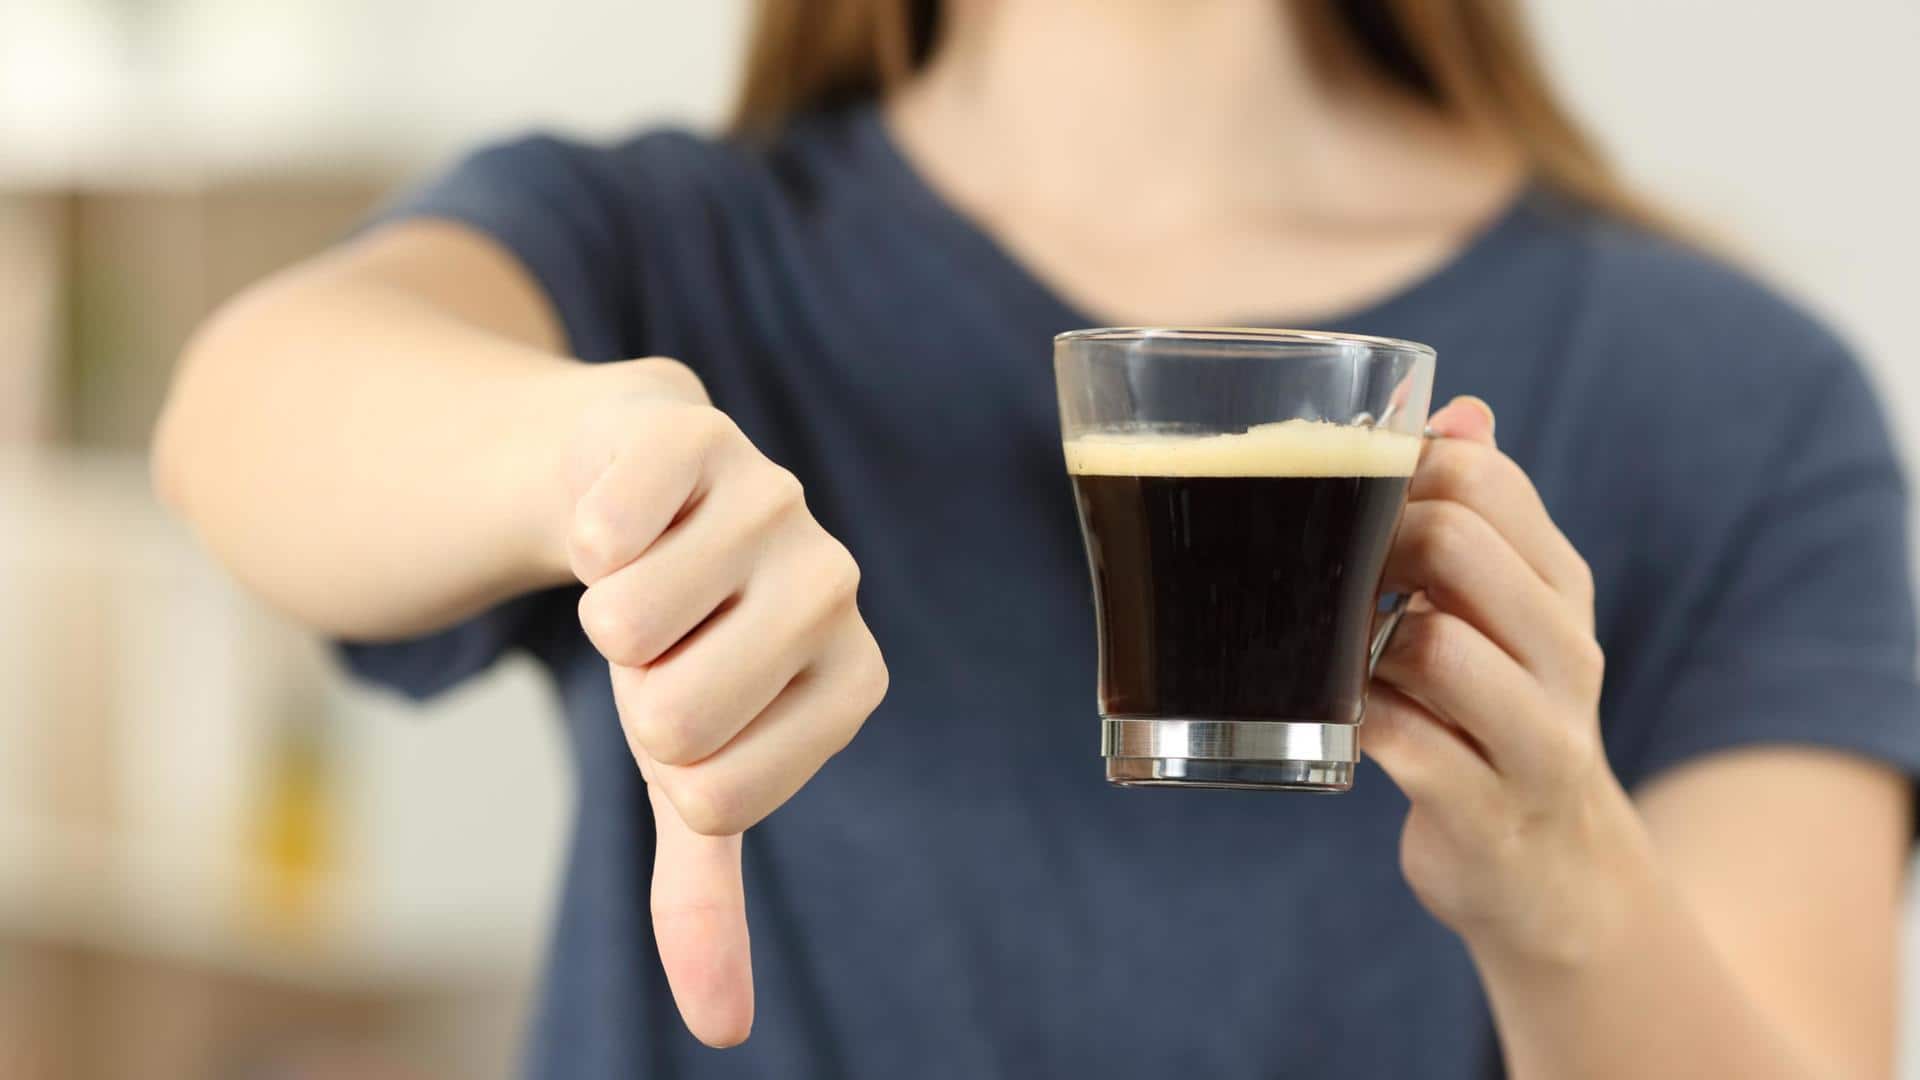 Expert-backed tips on how to safely cut down on caffeine